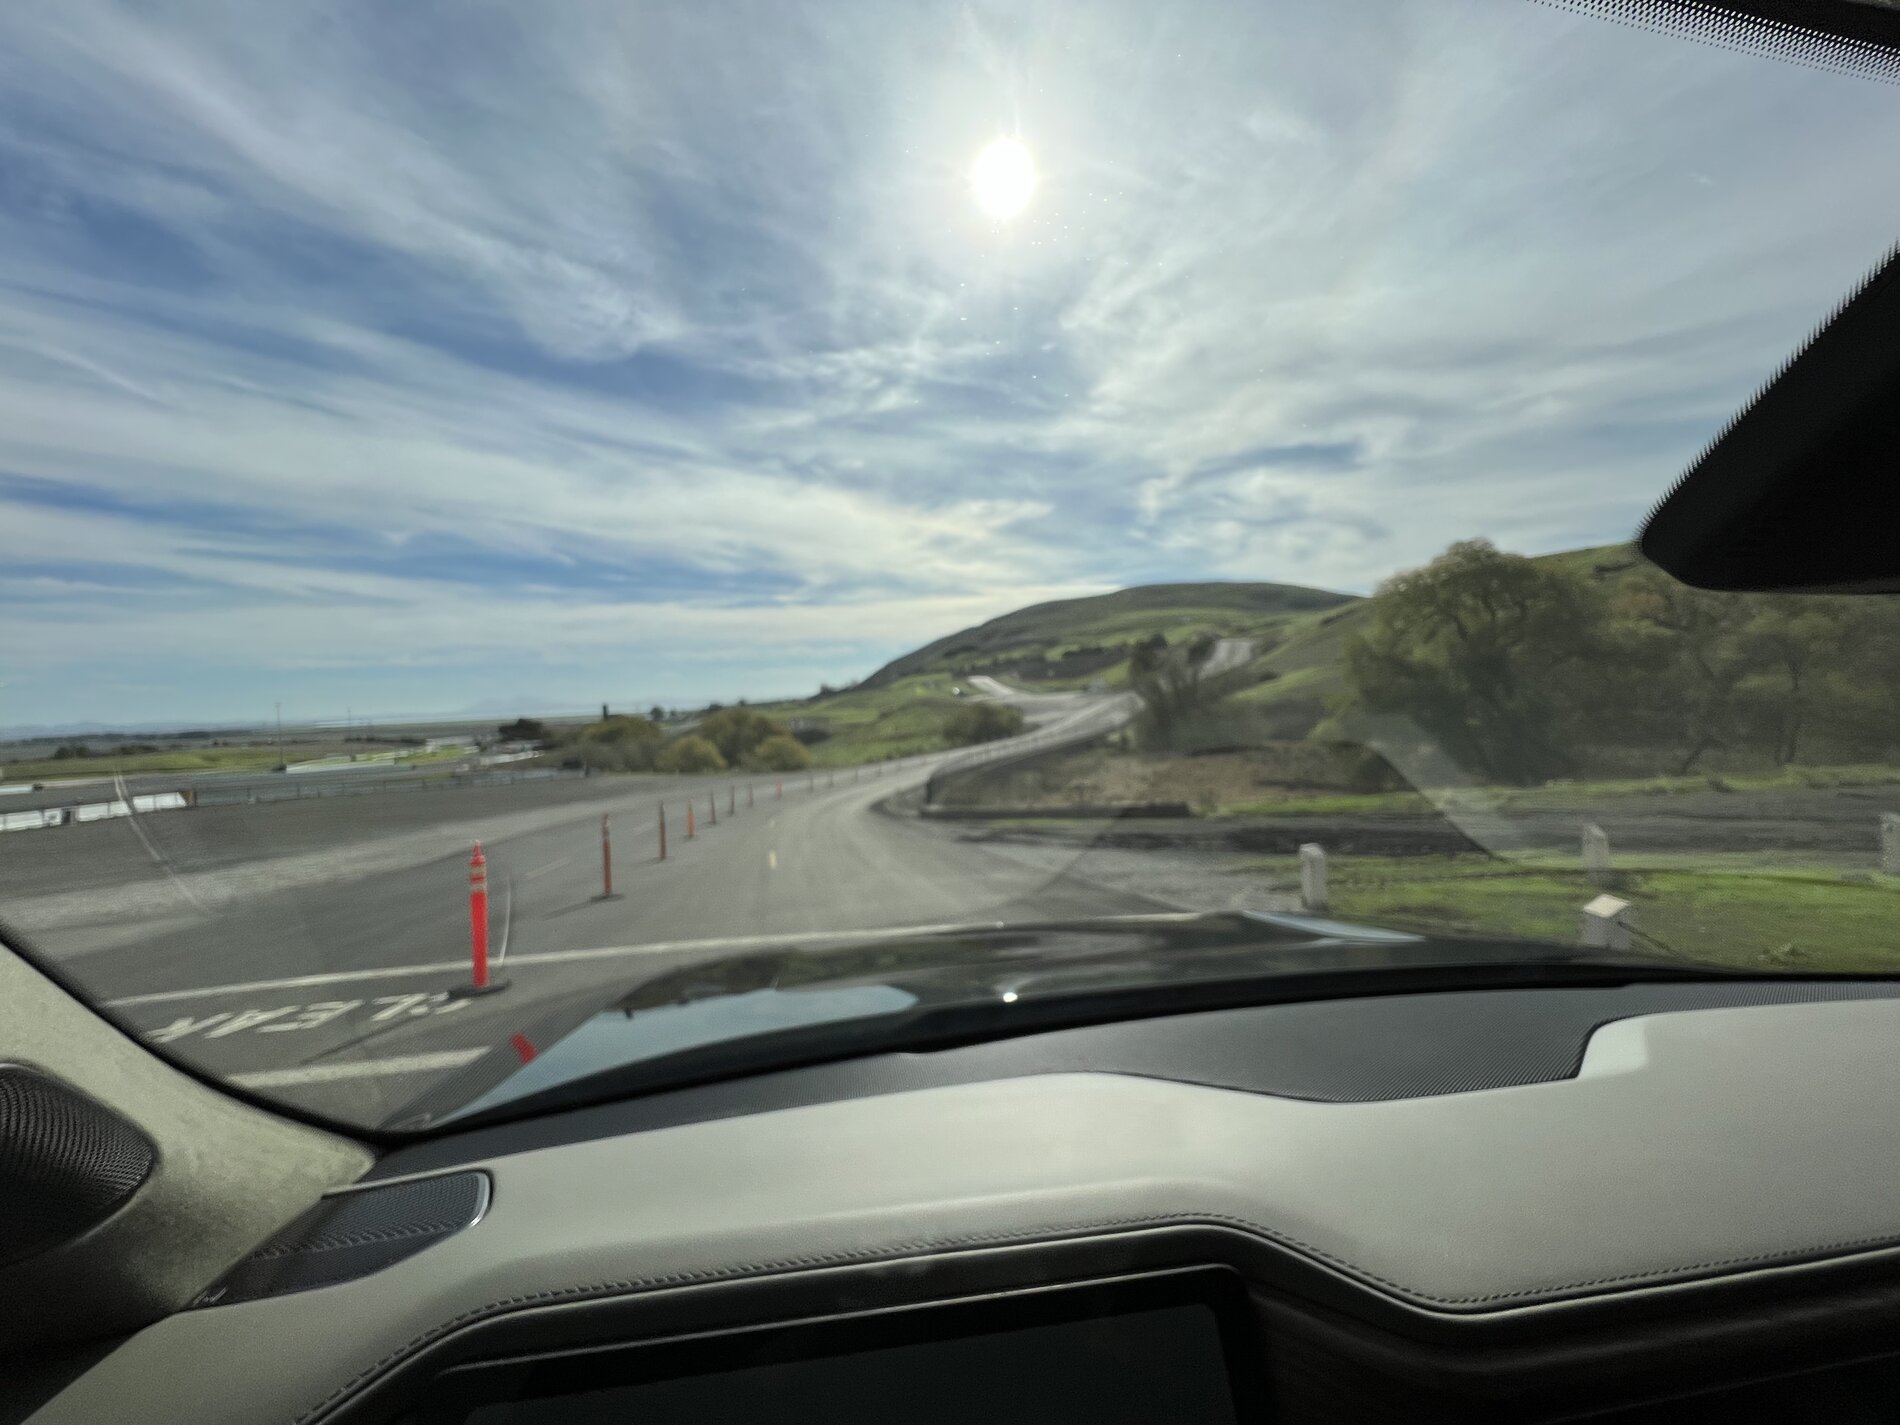 Rivian R1T R1S Official Thread for Sonoma Event Posts EB4E7C9D-08D4-4550-BF38-B42A45ECA763